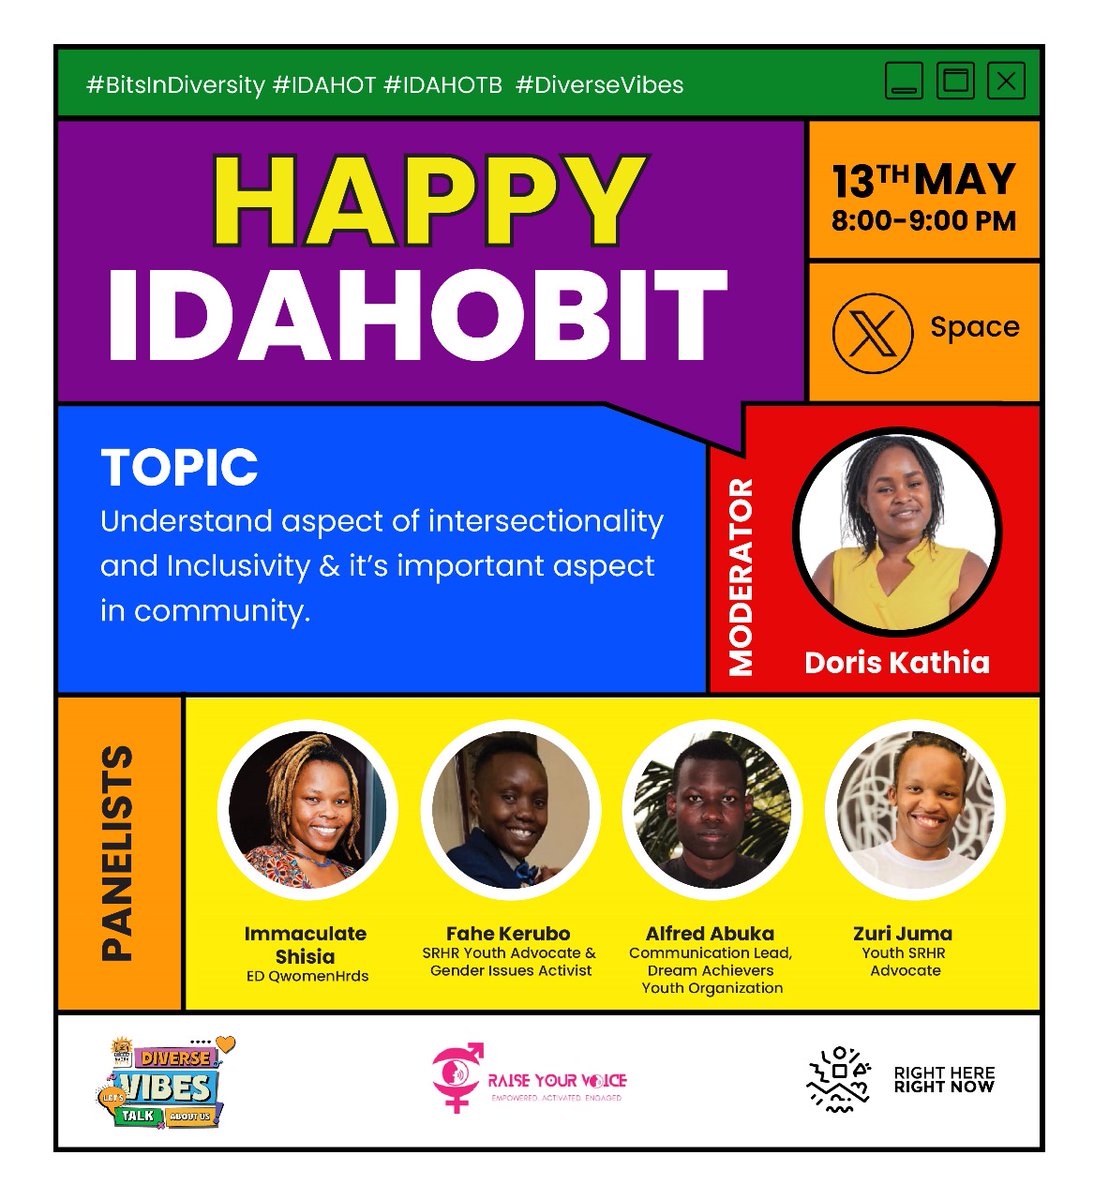 If we all took the time to understand intersectionality and inclusivity then cases of stigma and discrimination would be fewer in our community. #BitsInDiversity #IDAHOT #IDAHOTB #DiverseVibes @Nairobits @lovematterskenya @kenyasrhr @rhrnkenya @QwomenHRDs @DreamAchieversk